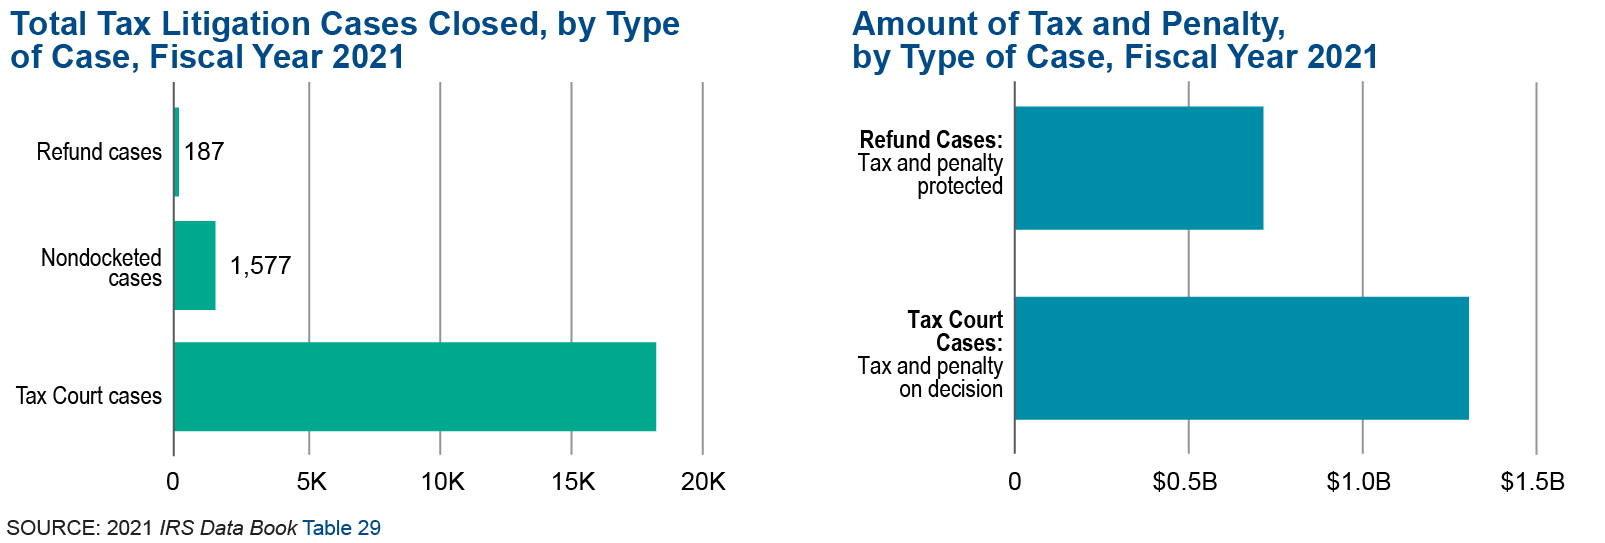 Graphic on the left shows the number of tax litigation cases closed by type of case in fiscal year 2021. There were 19,199 Tax Court cases closed, 1,577 nondocketed cases closed, and 187 refund cases closed. Graphic on the right shows the amount of tax and penalty by type of case in fiscal year 2021. Tax court cases closed in fiscal year 2021 resulted in $1.3 billion in taxes and penalty. Refund cases closed in fiscal year 2018 protected $714.0 million in taxes and penalty.